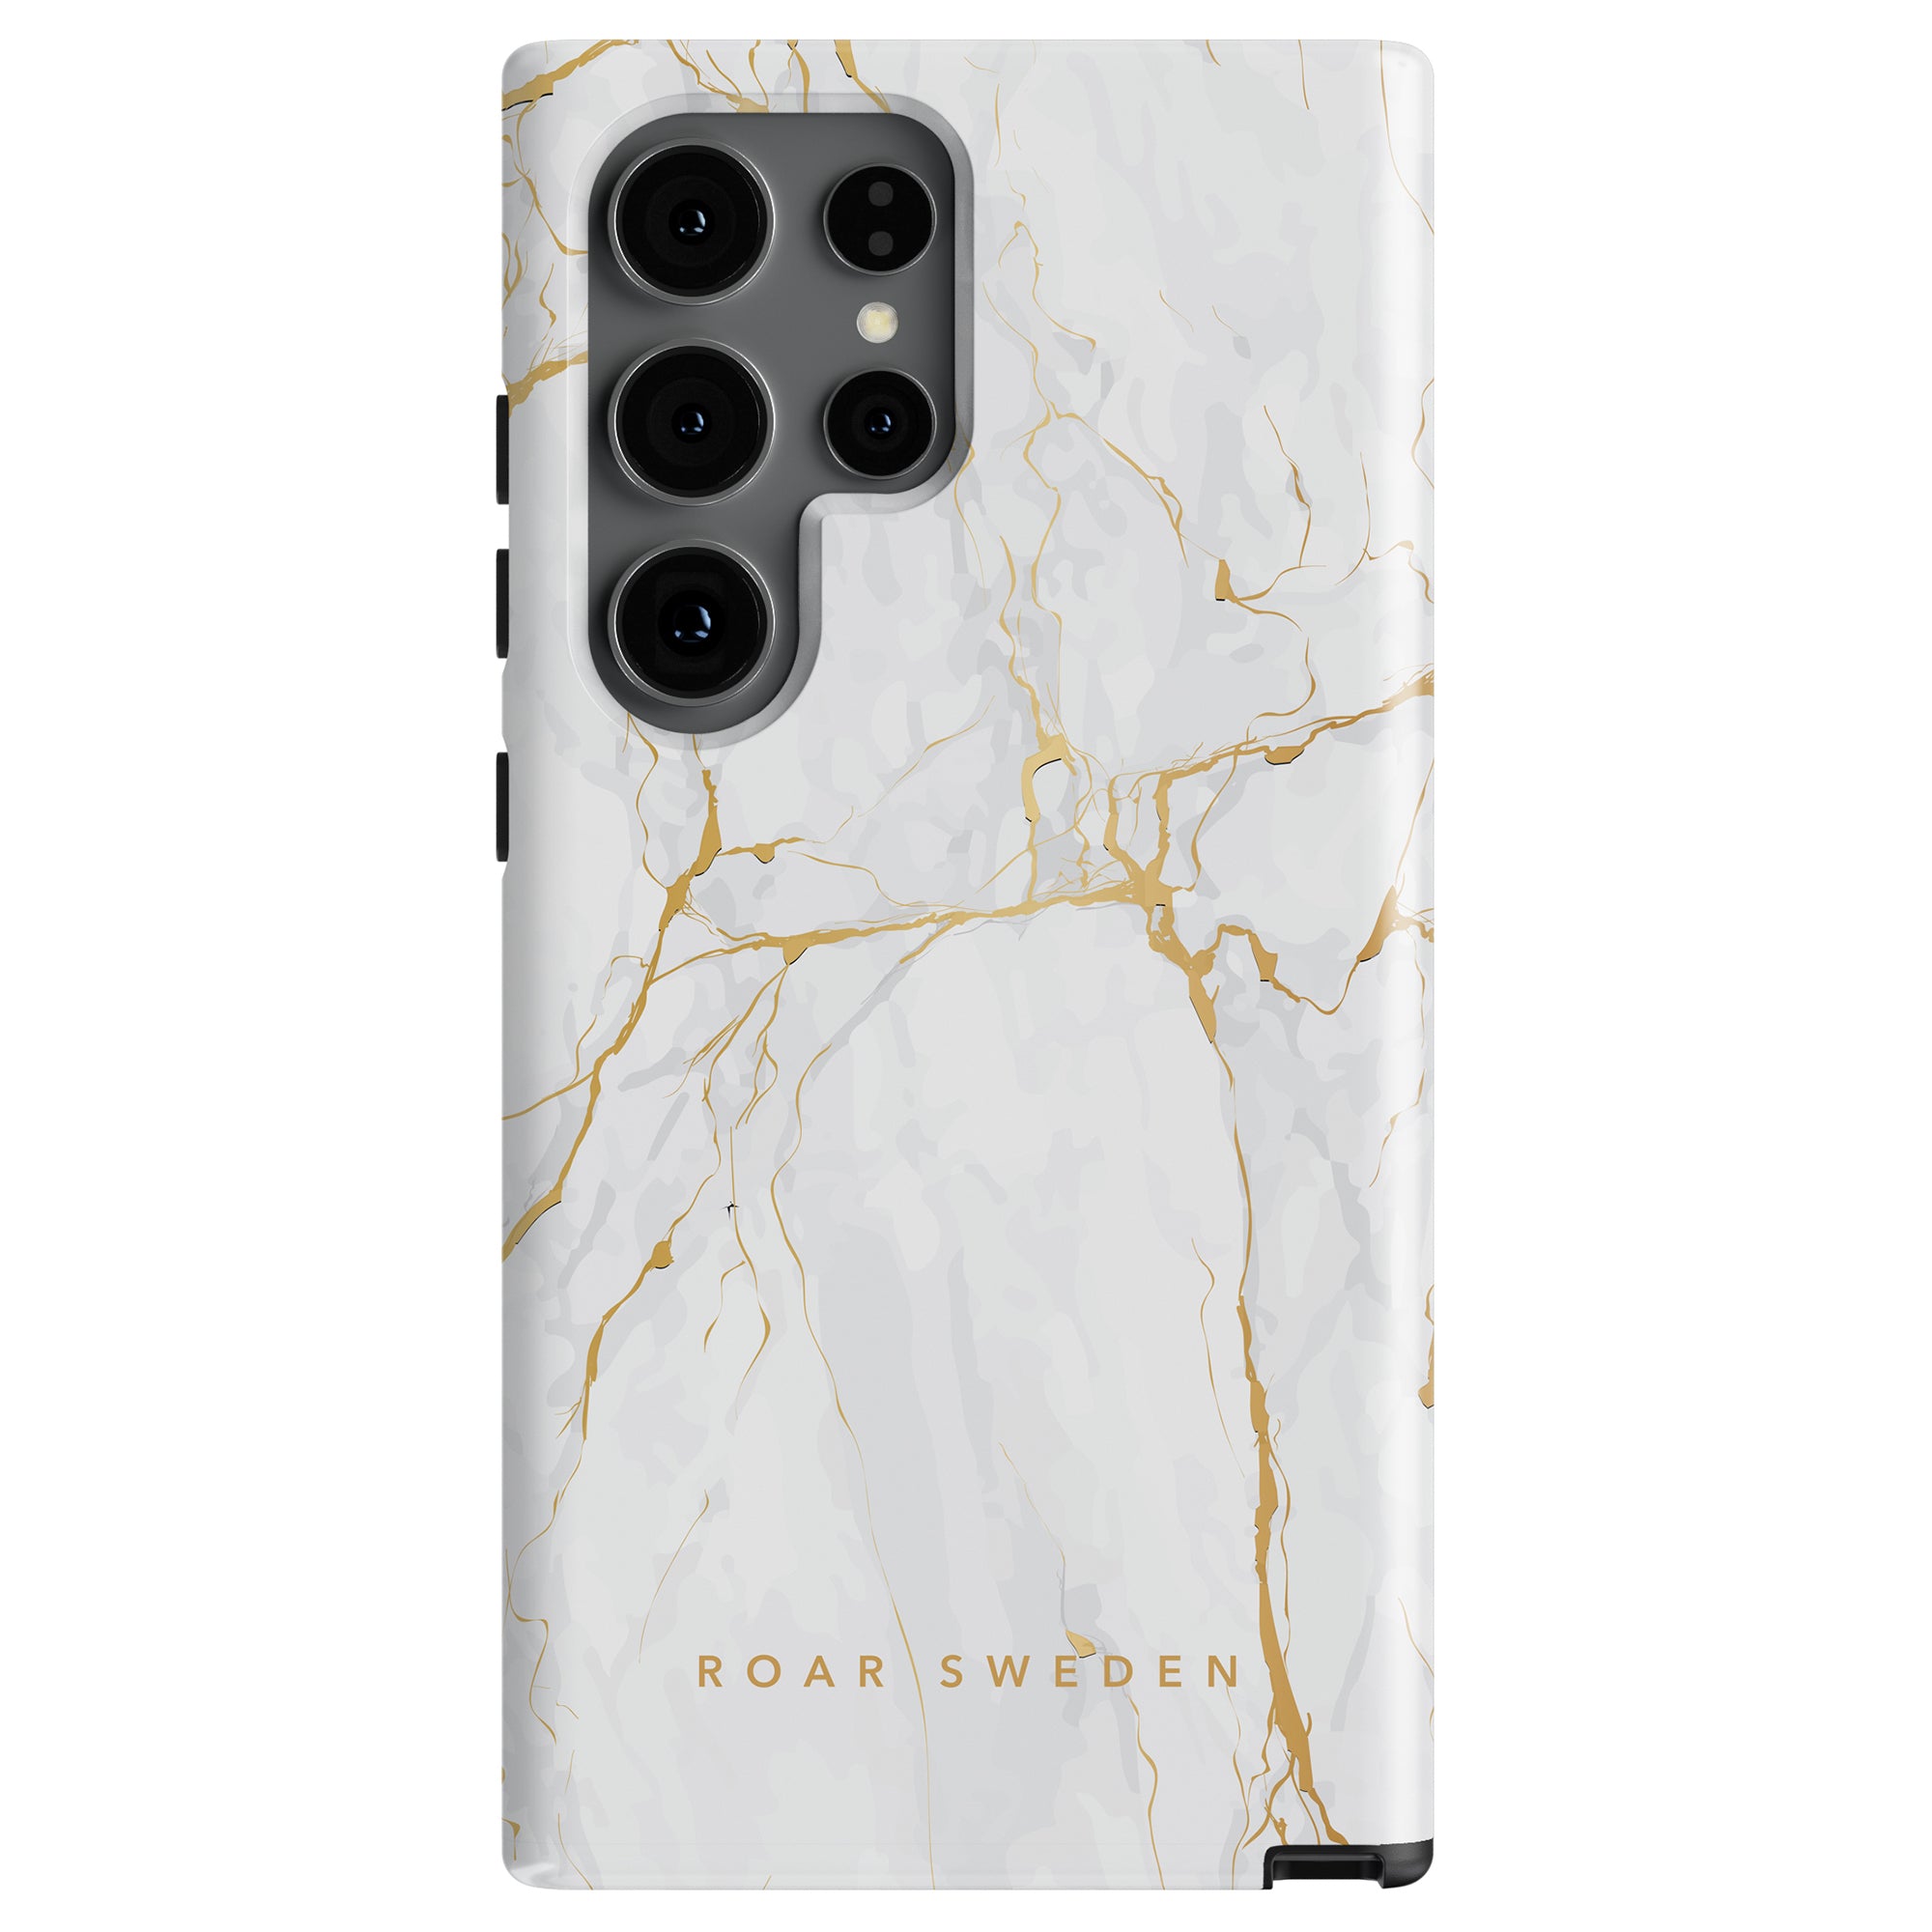 A smartphone with a white marble and gold accent cover, known as the Calacatta Gold - Tough Case, is shown. The text "ROAR SWEDEN" is printed at the bottom of the case. The phone has four rear camera lenses, offering högklassigt skydd and a lyxig design.